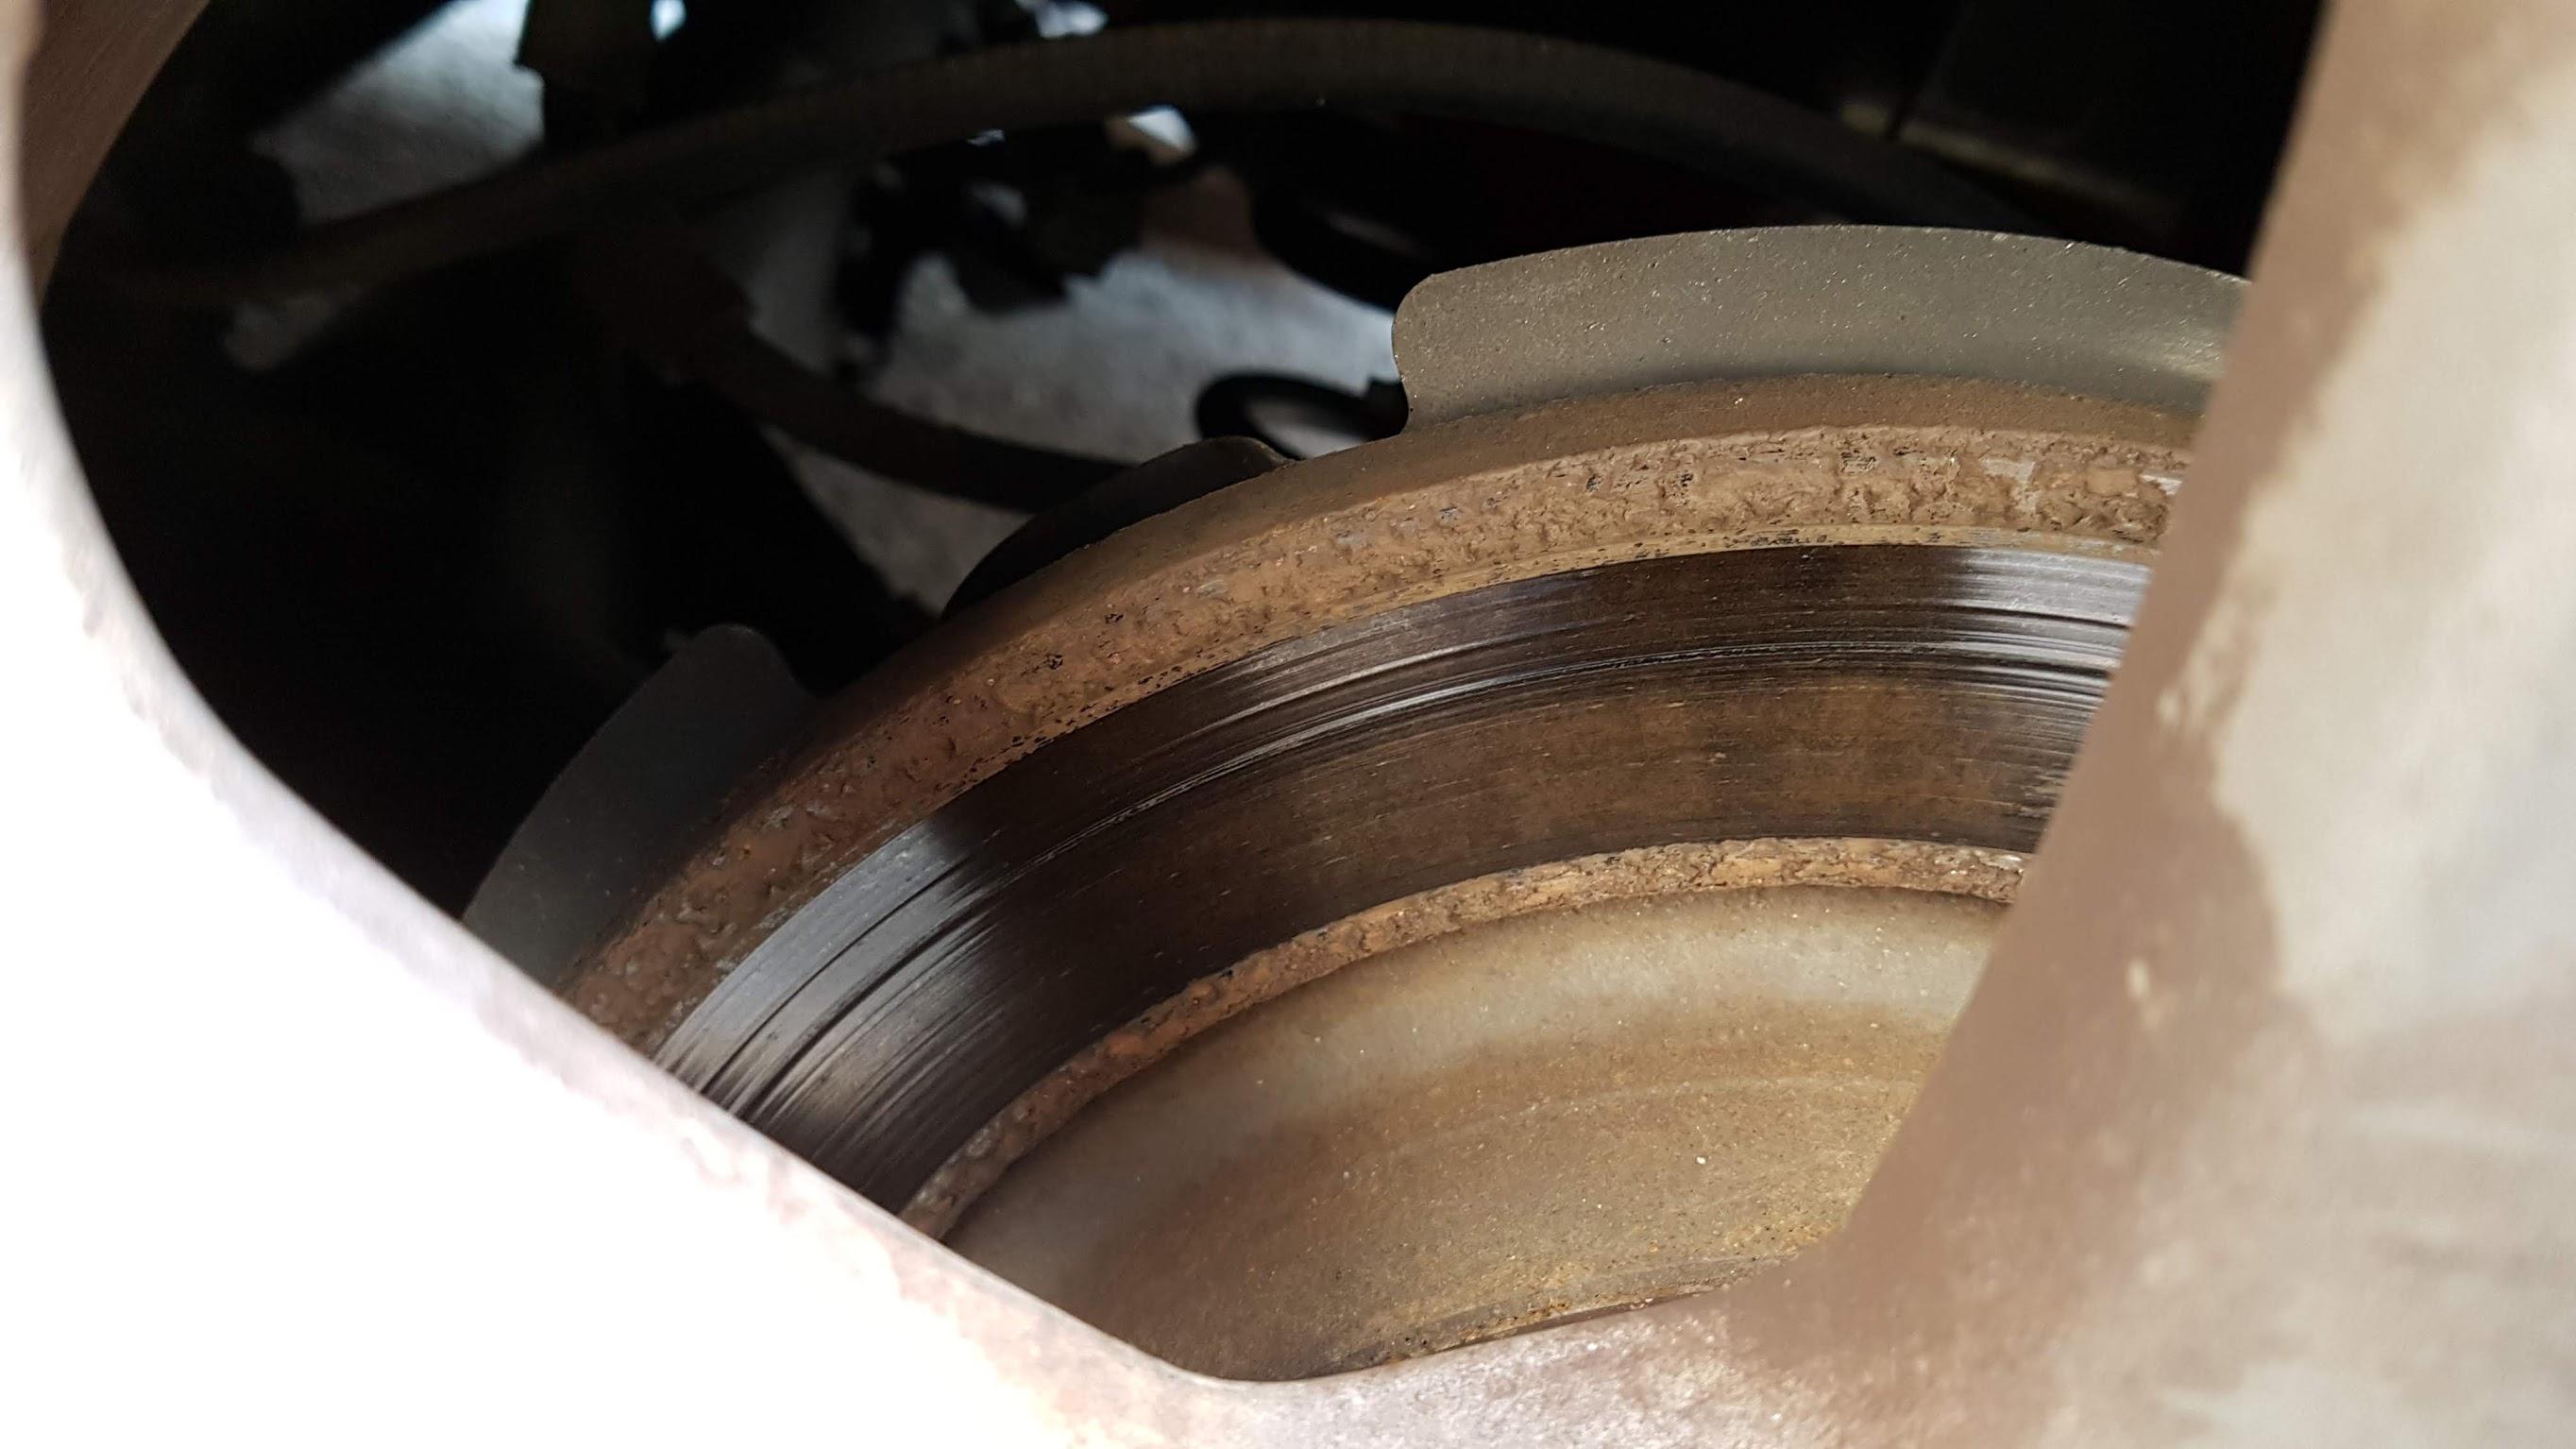 Brake Rotors - Uneven wear - Ford Fiesta Club - Ford Owners Club - Ford